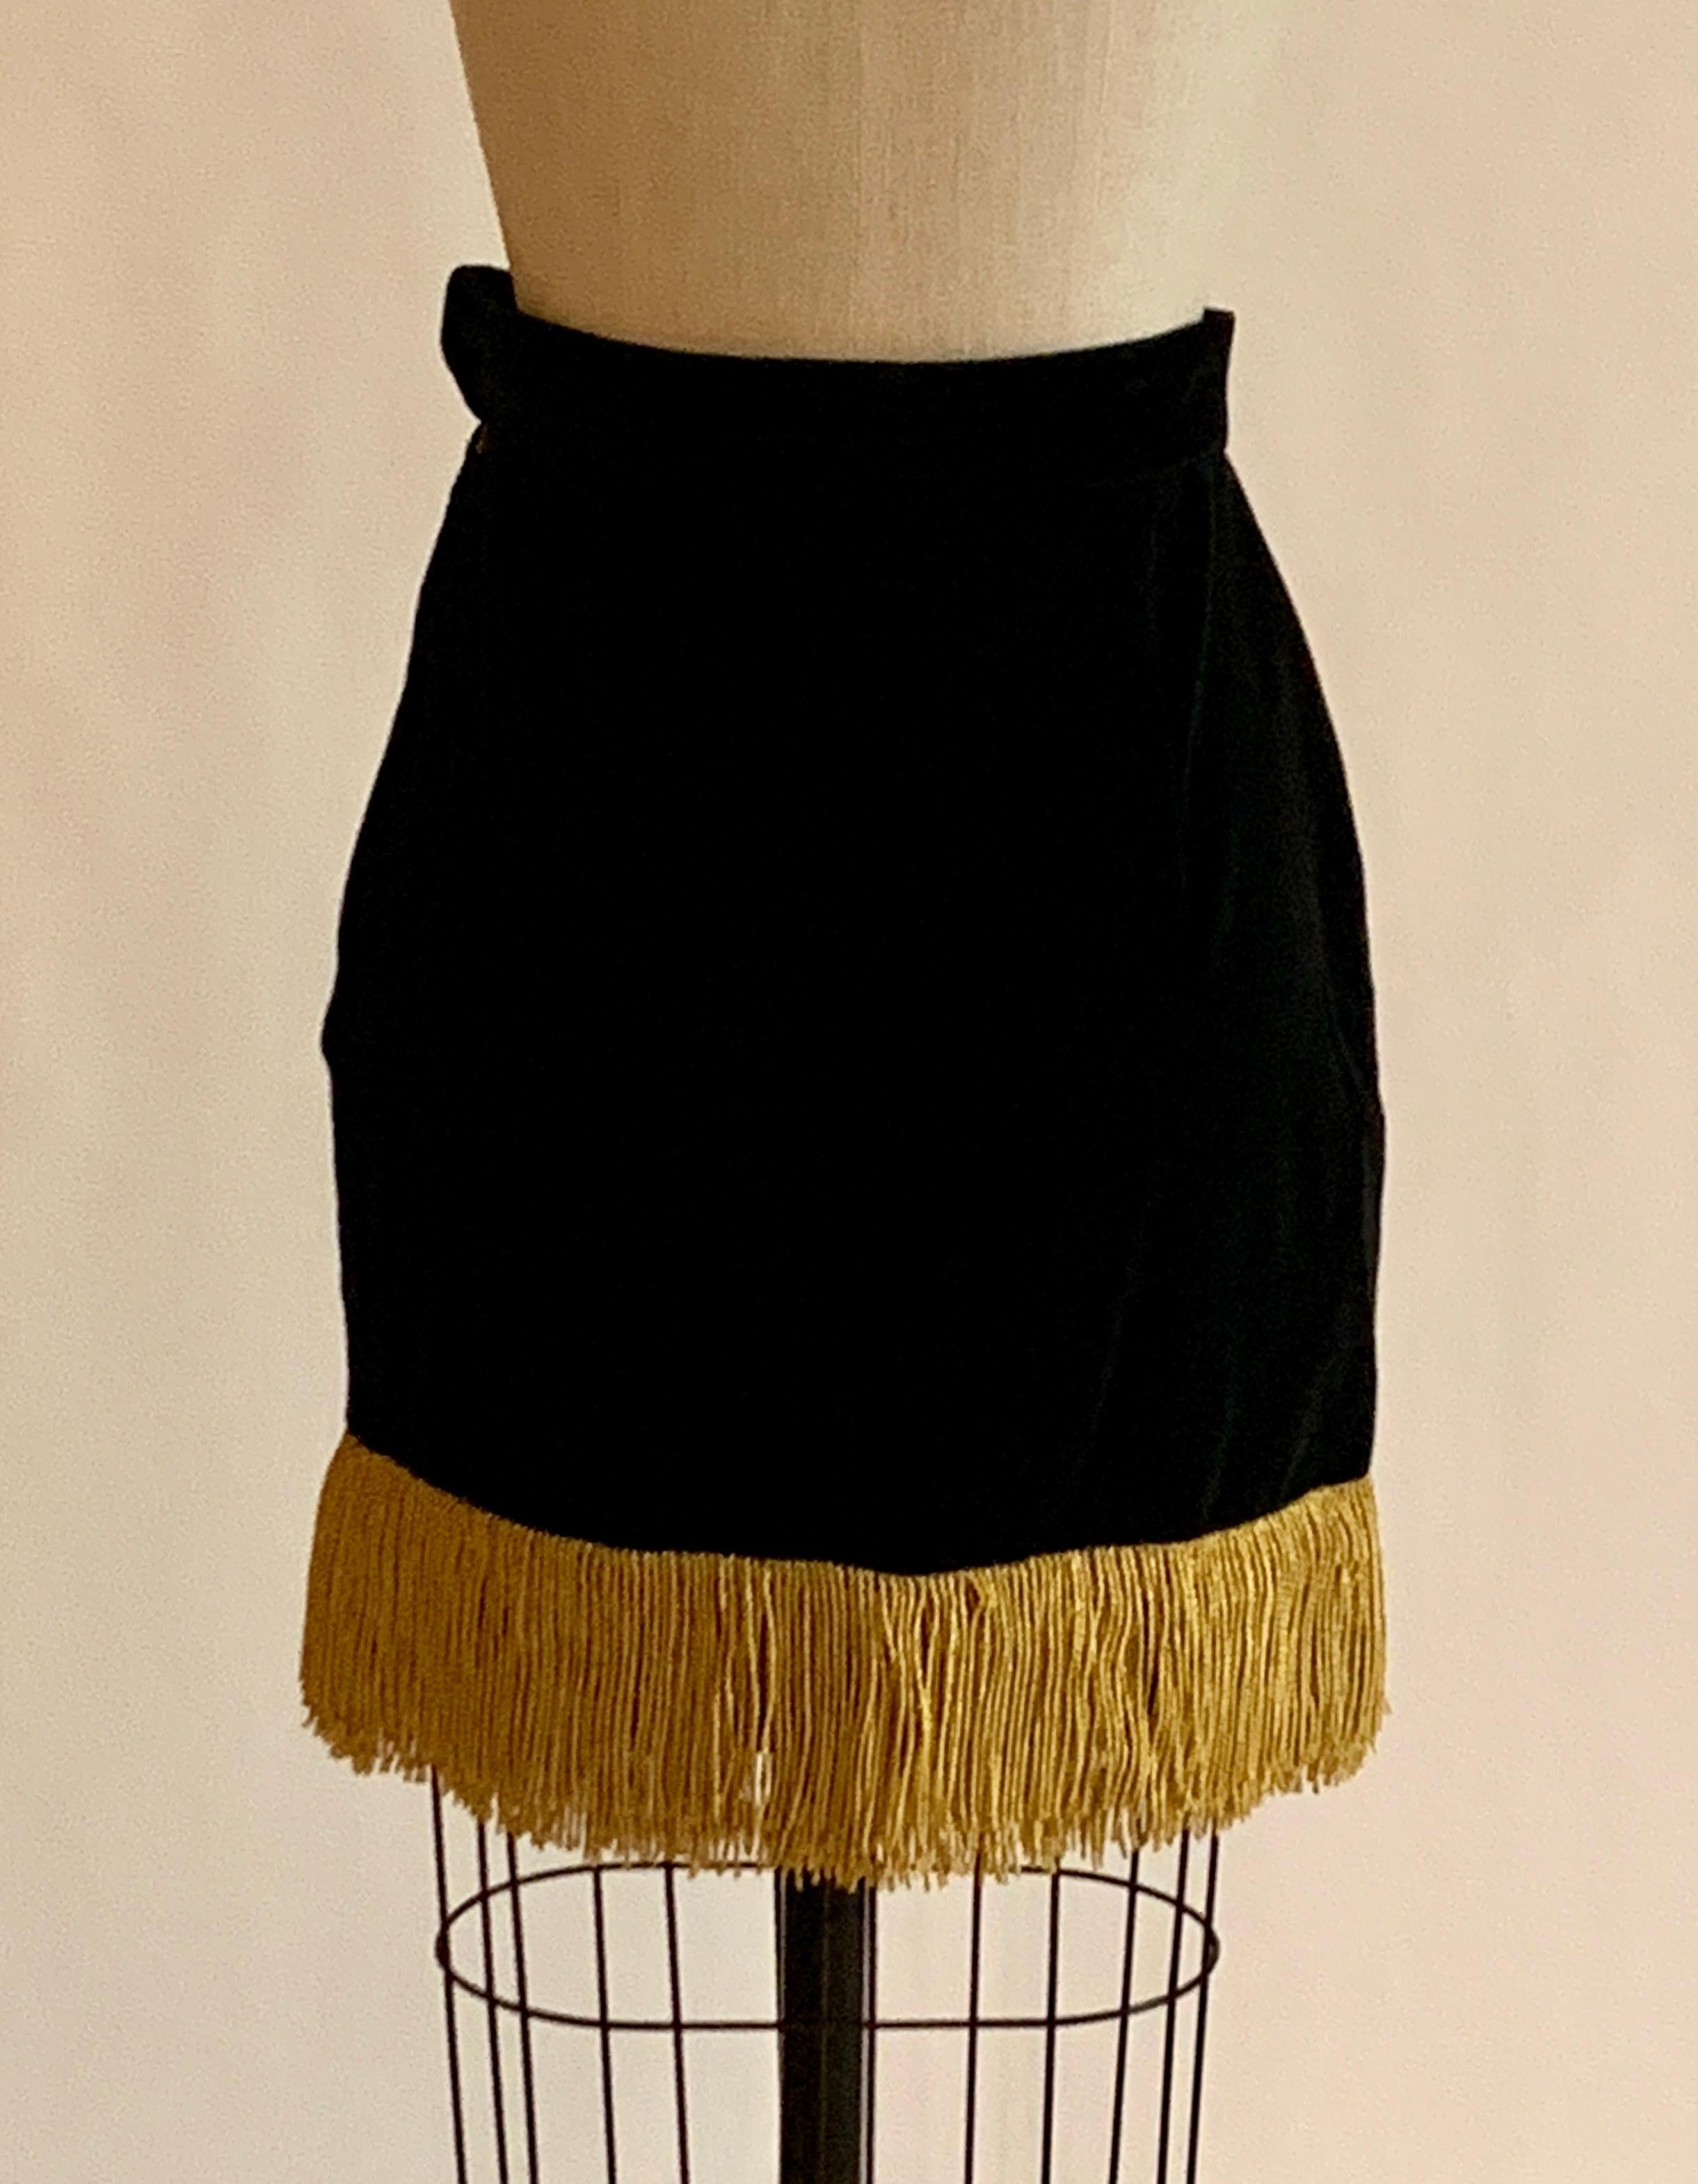 Moschino 1990s Black Velvet Pencil Skirt with Gold Fringe Trim In Good Condition In San Francisco, CA